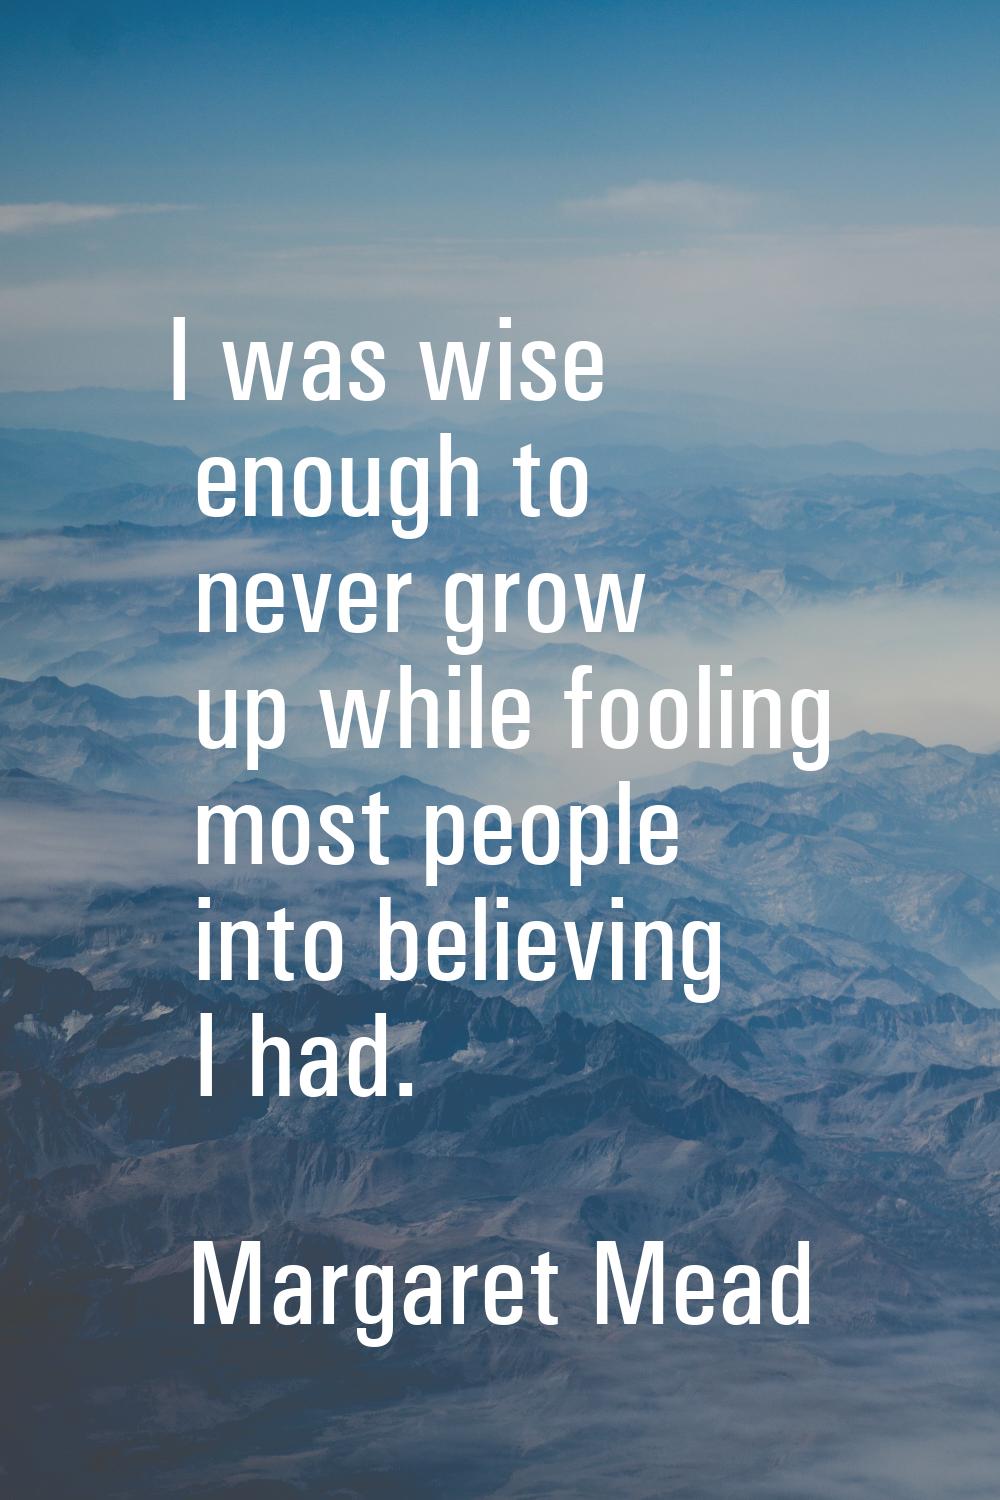 I was wise enough to never grow up while fooling most people into believing I had.